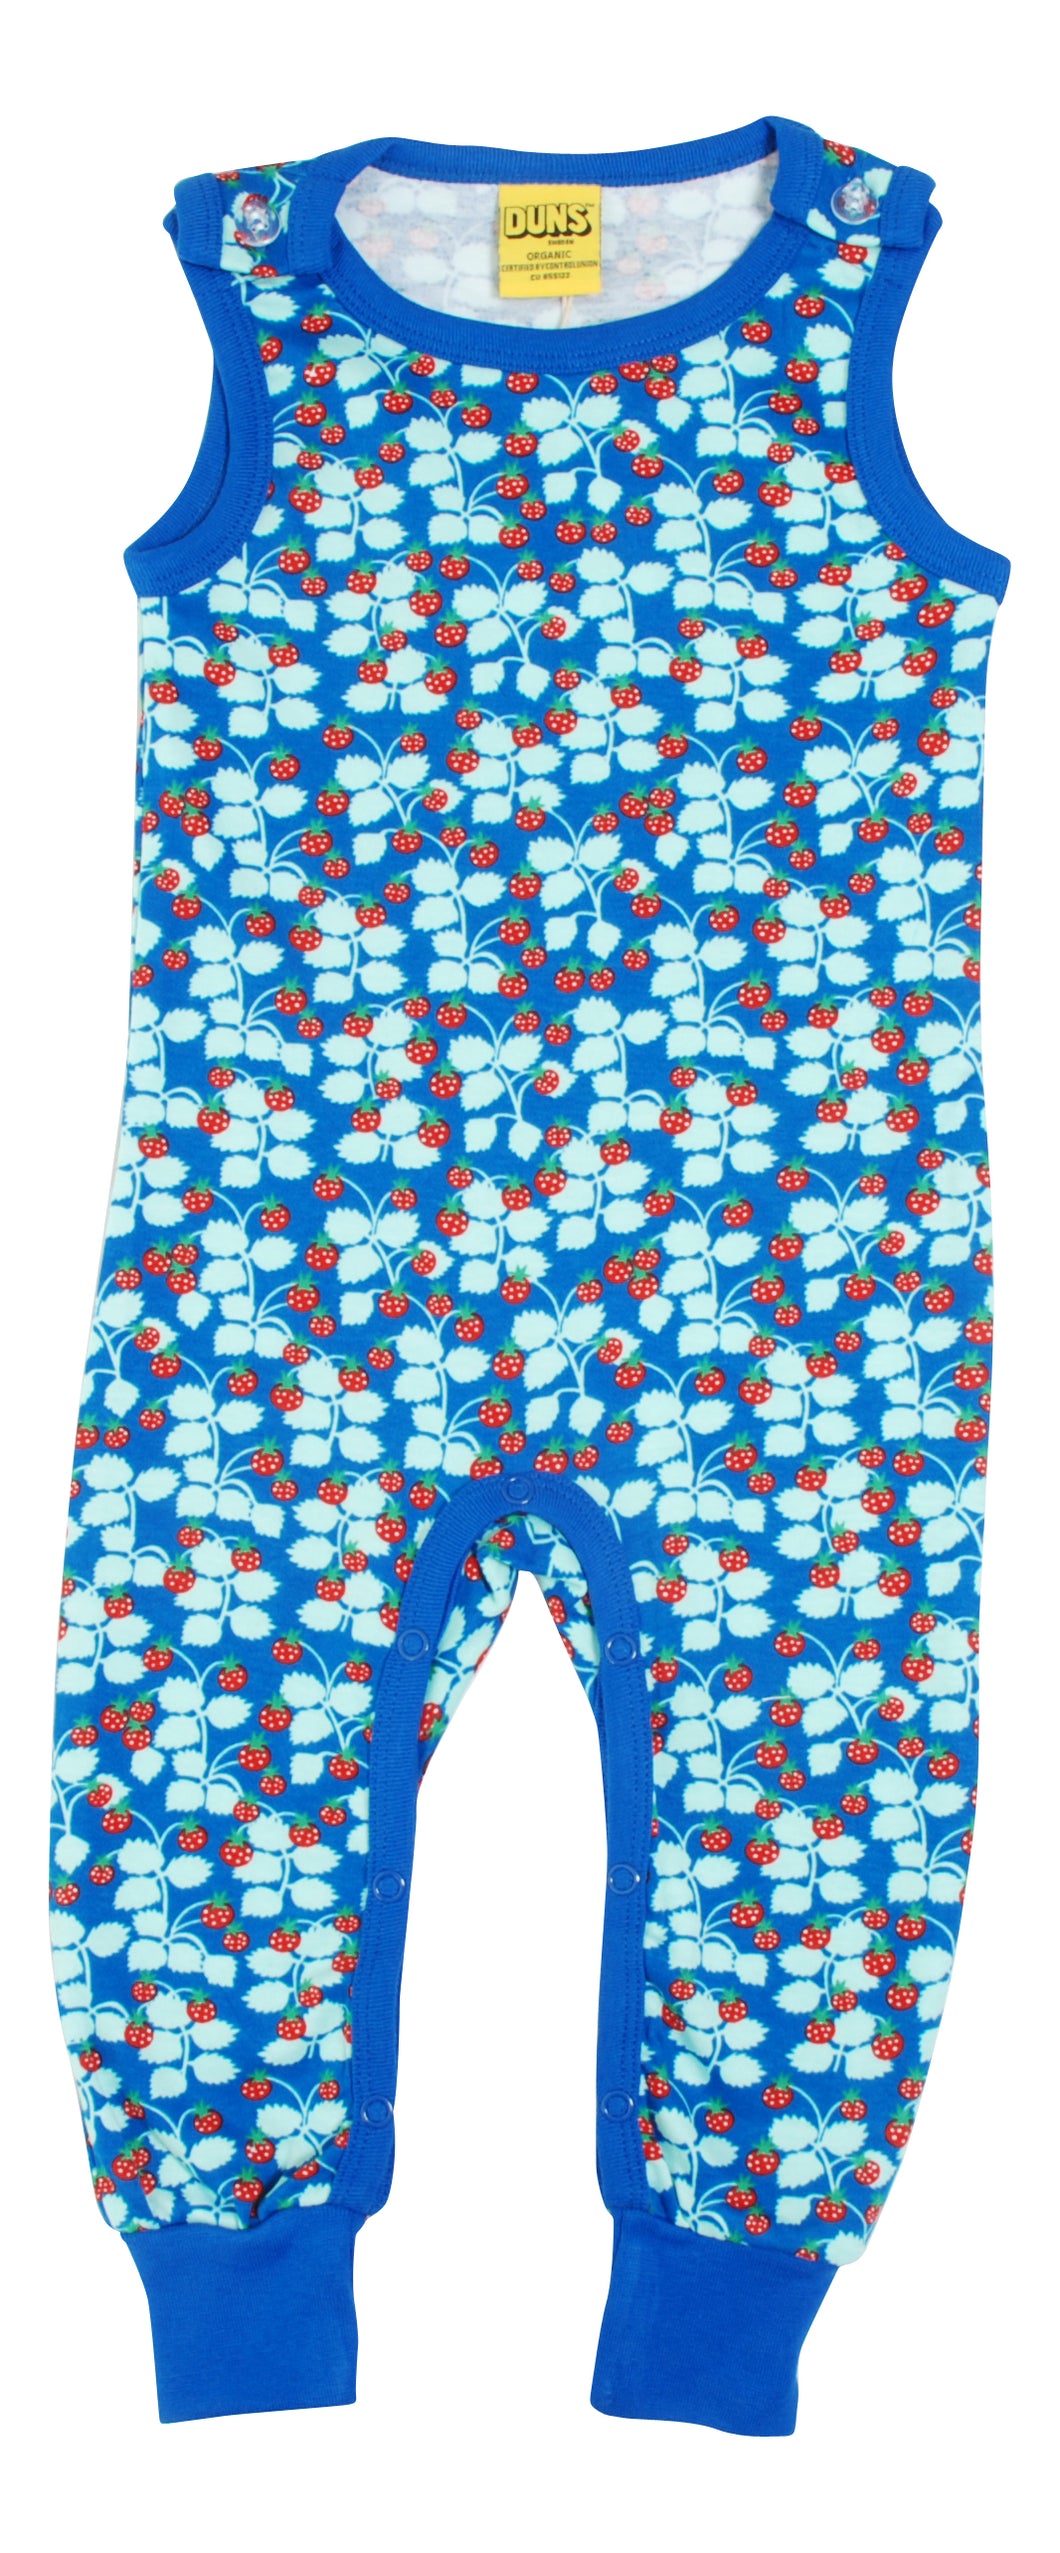 Duns Dungarees - Wild Strawberry - Blue